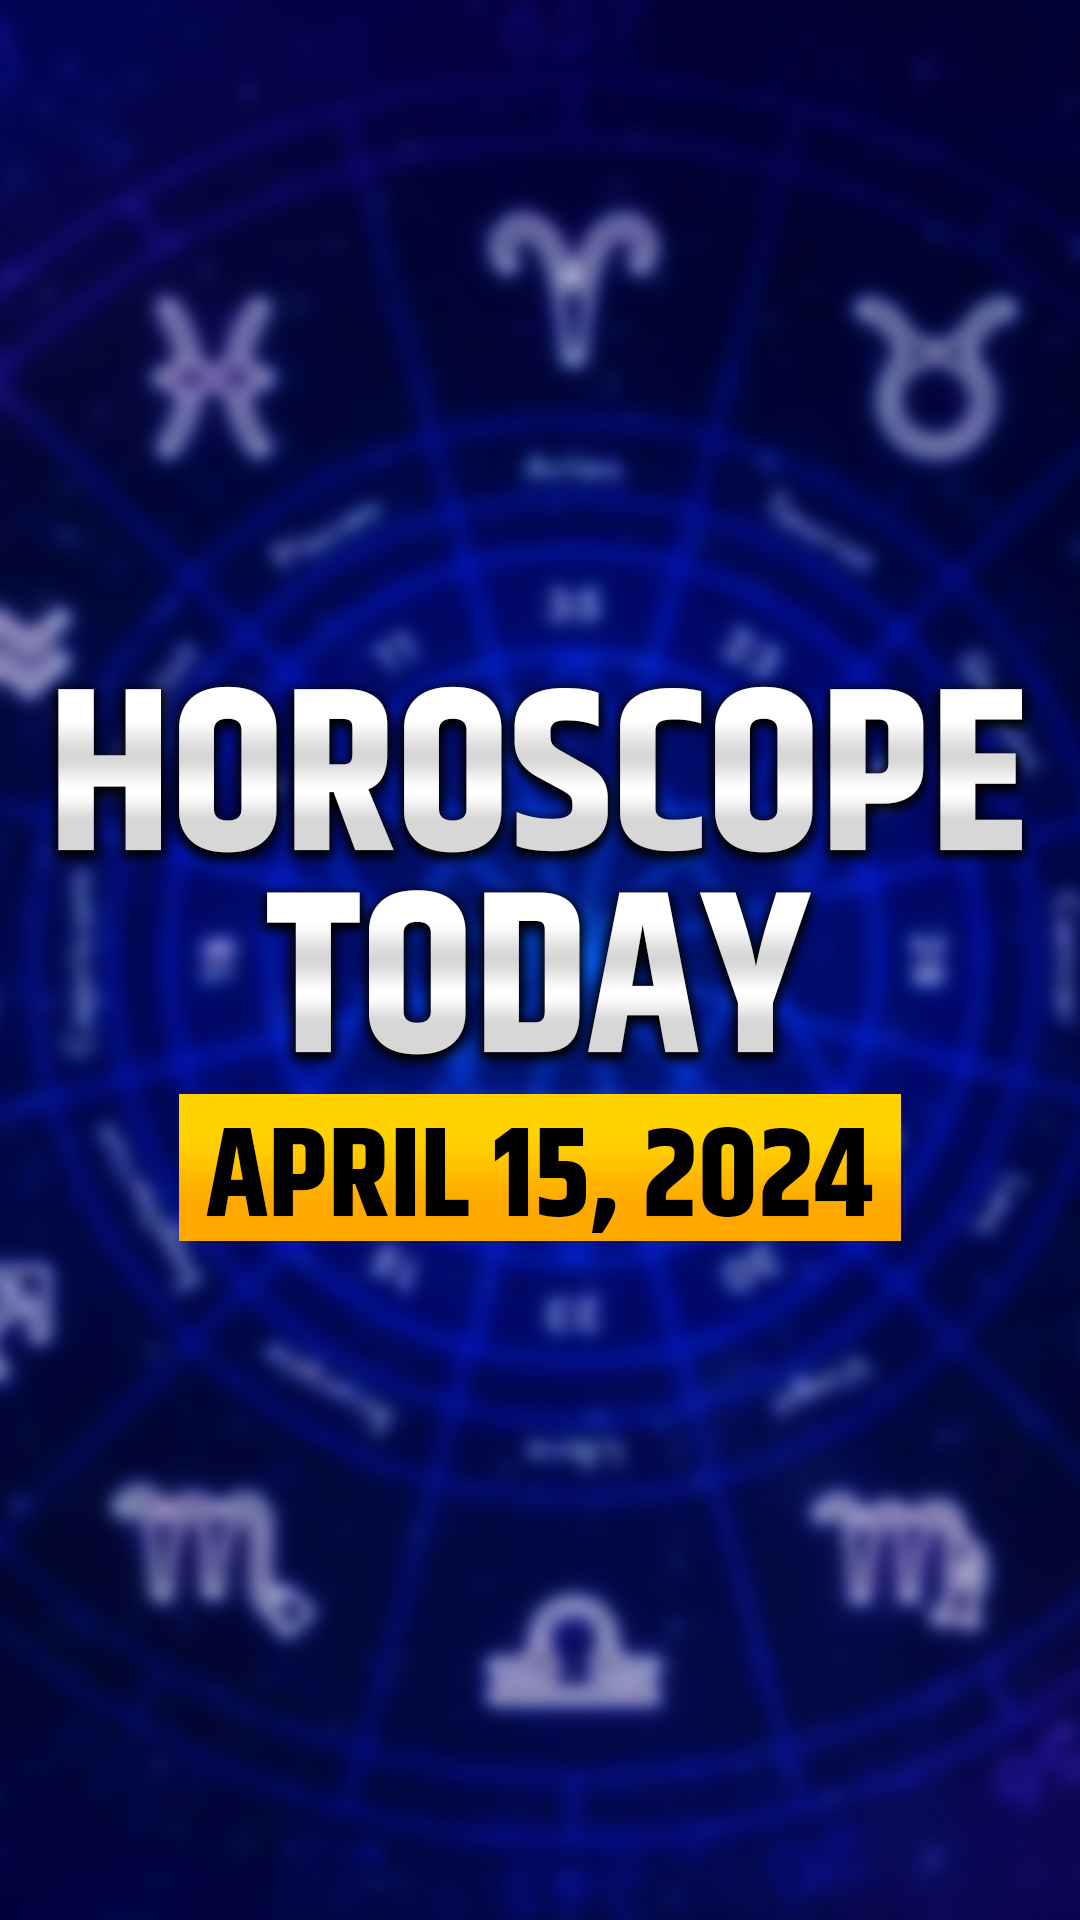 Know Lucky number and colour for all zodiac signs in your horoscope for April 15, 2024